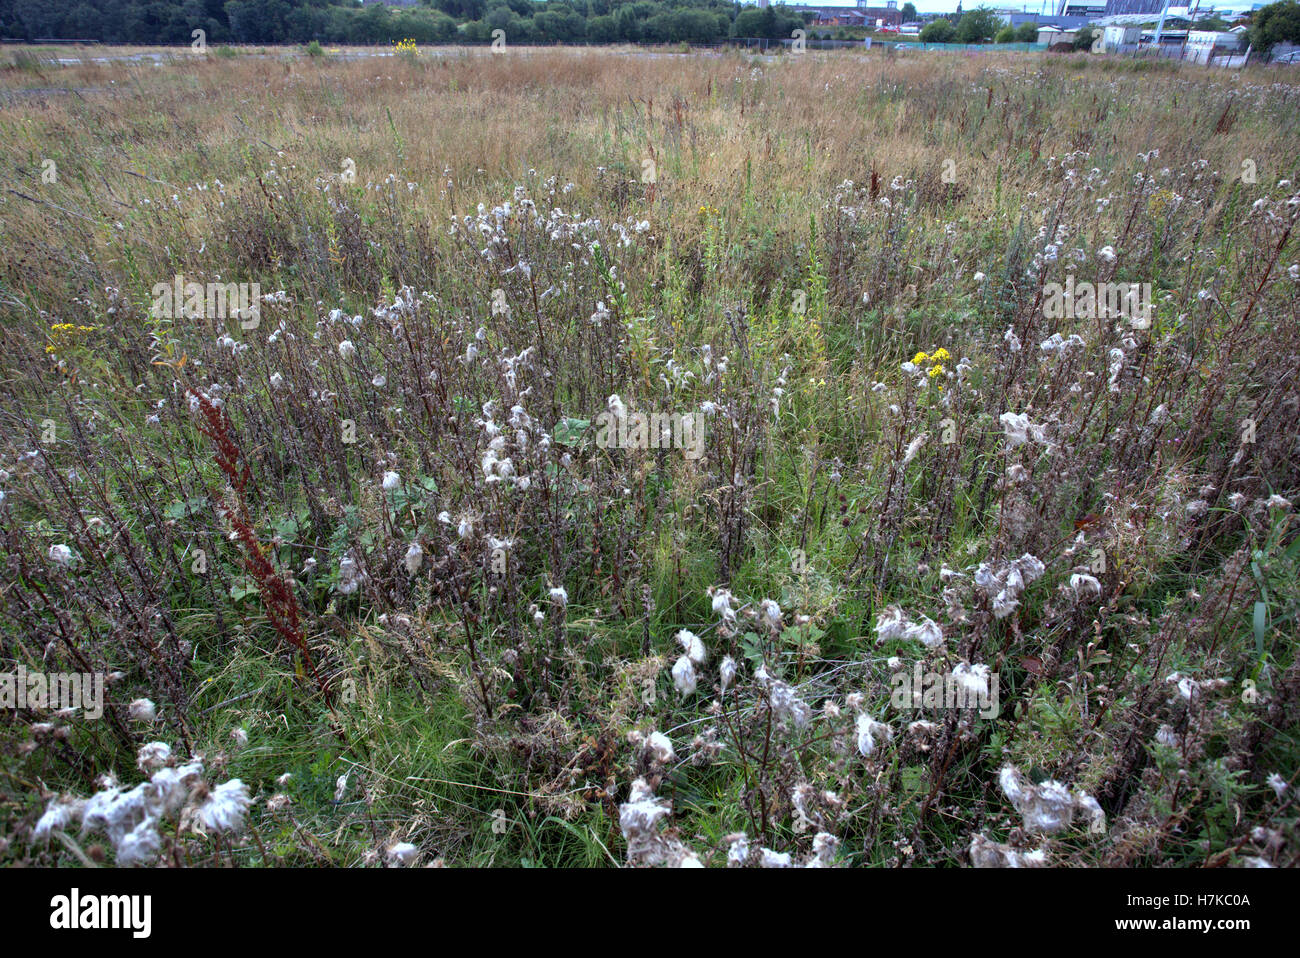 Scottish wild meadow flower clydeside waste ground background grasses and weeds Stock Photo